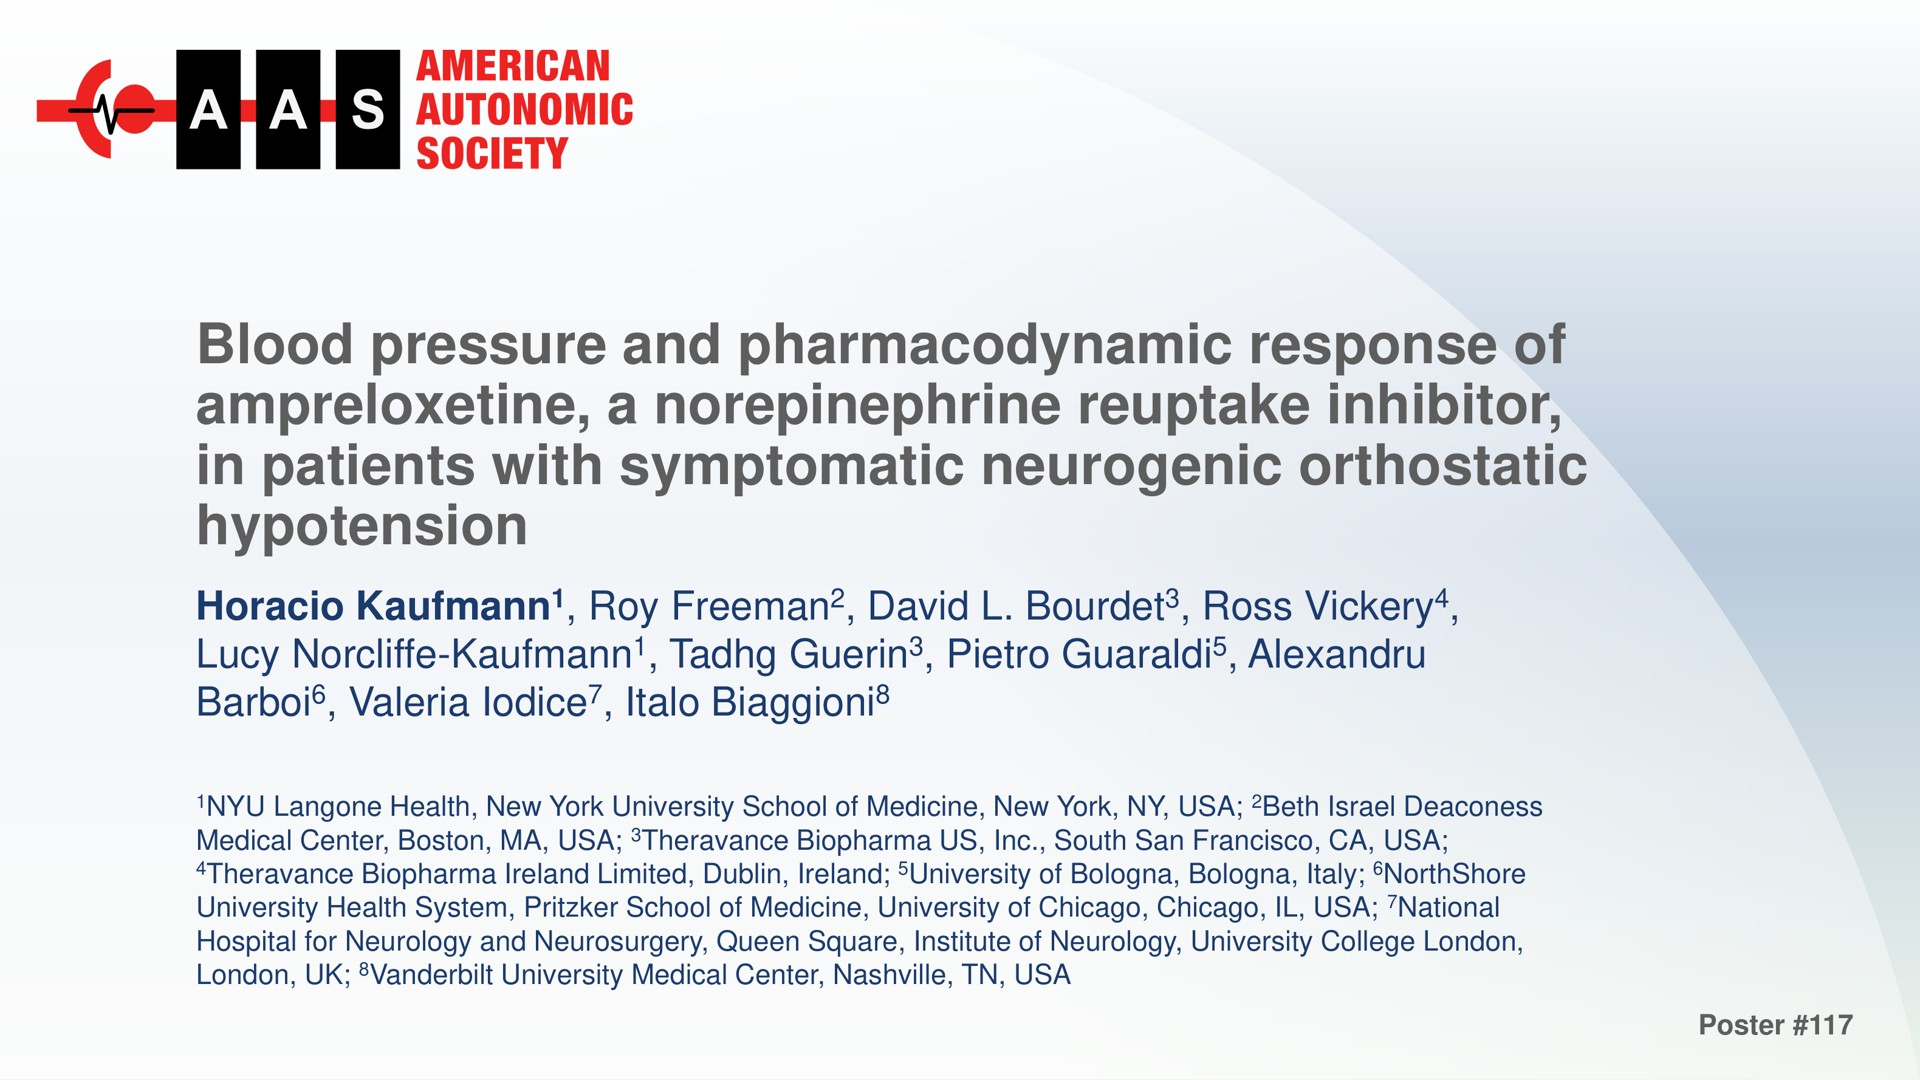 blood pressure and pharmacodynamic response of a inhibitor in patients with symptomatic neurogenic orthostatic hypotension | Theravance Biopharma